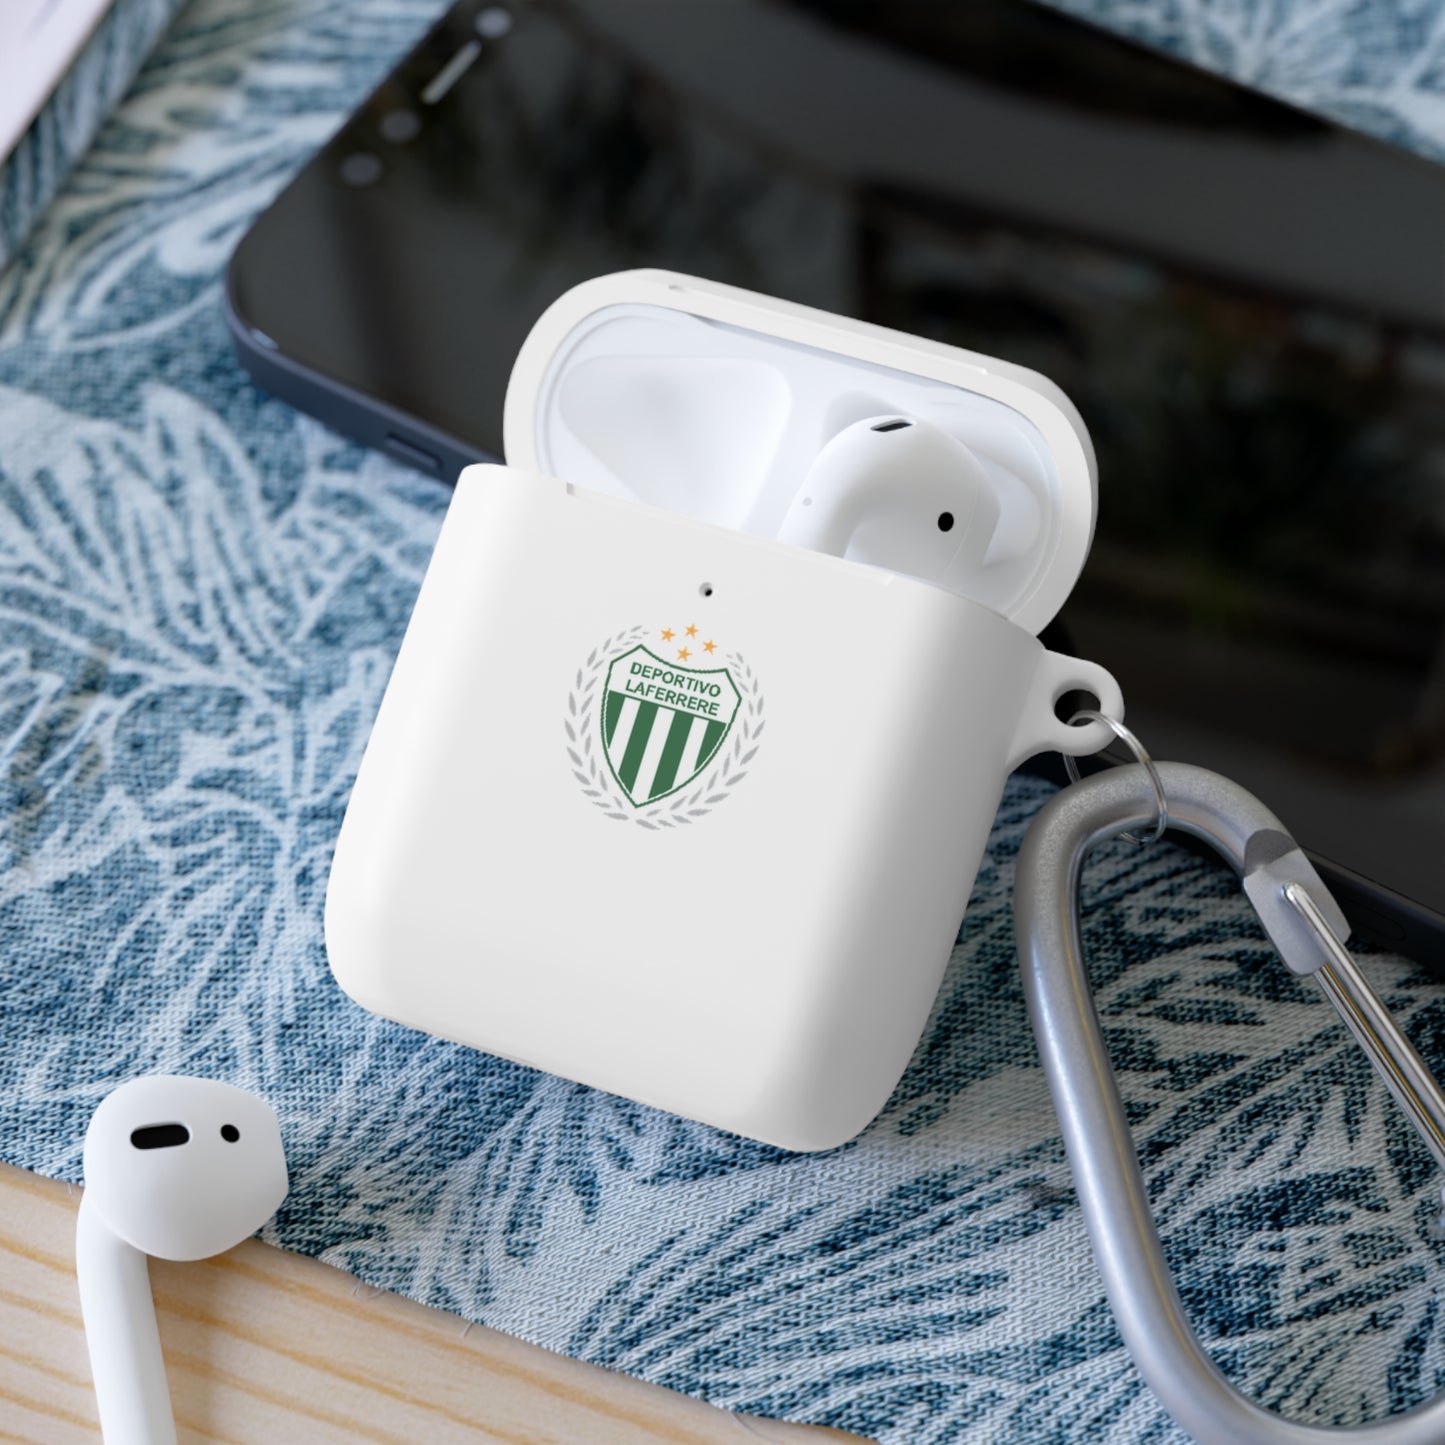 Club Social y Cultural Deportivo Laferrere de Laferrere Buenos Aires 2019 AirPods and AirPods Pro Case Cover